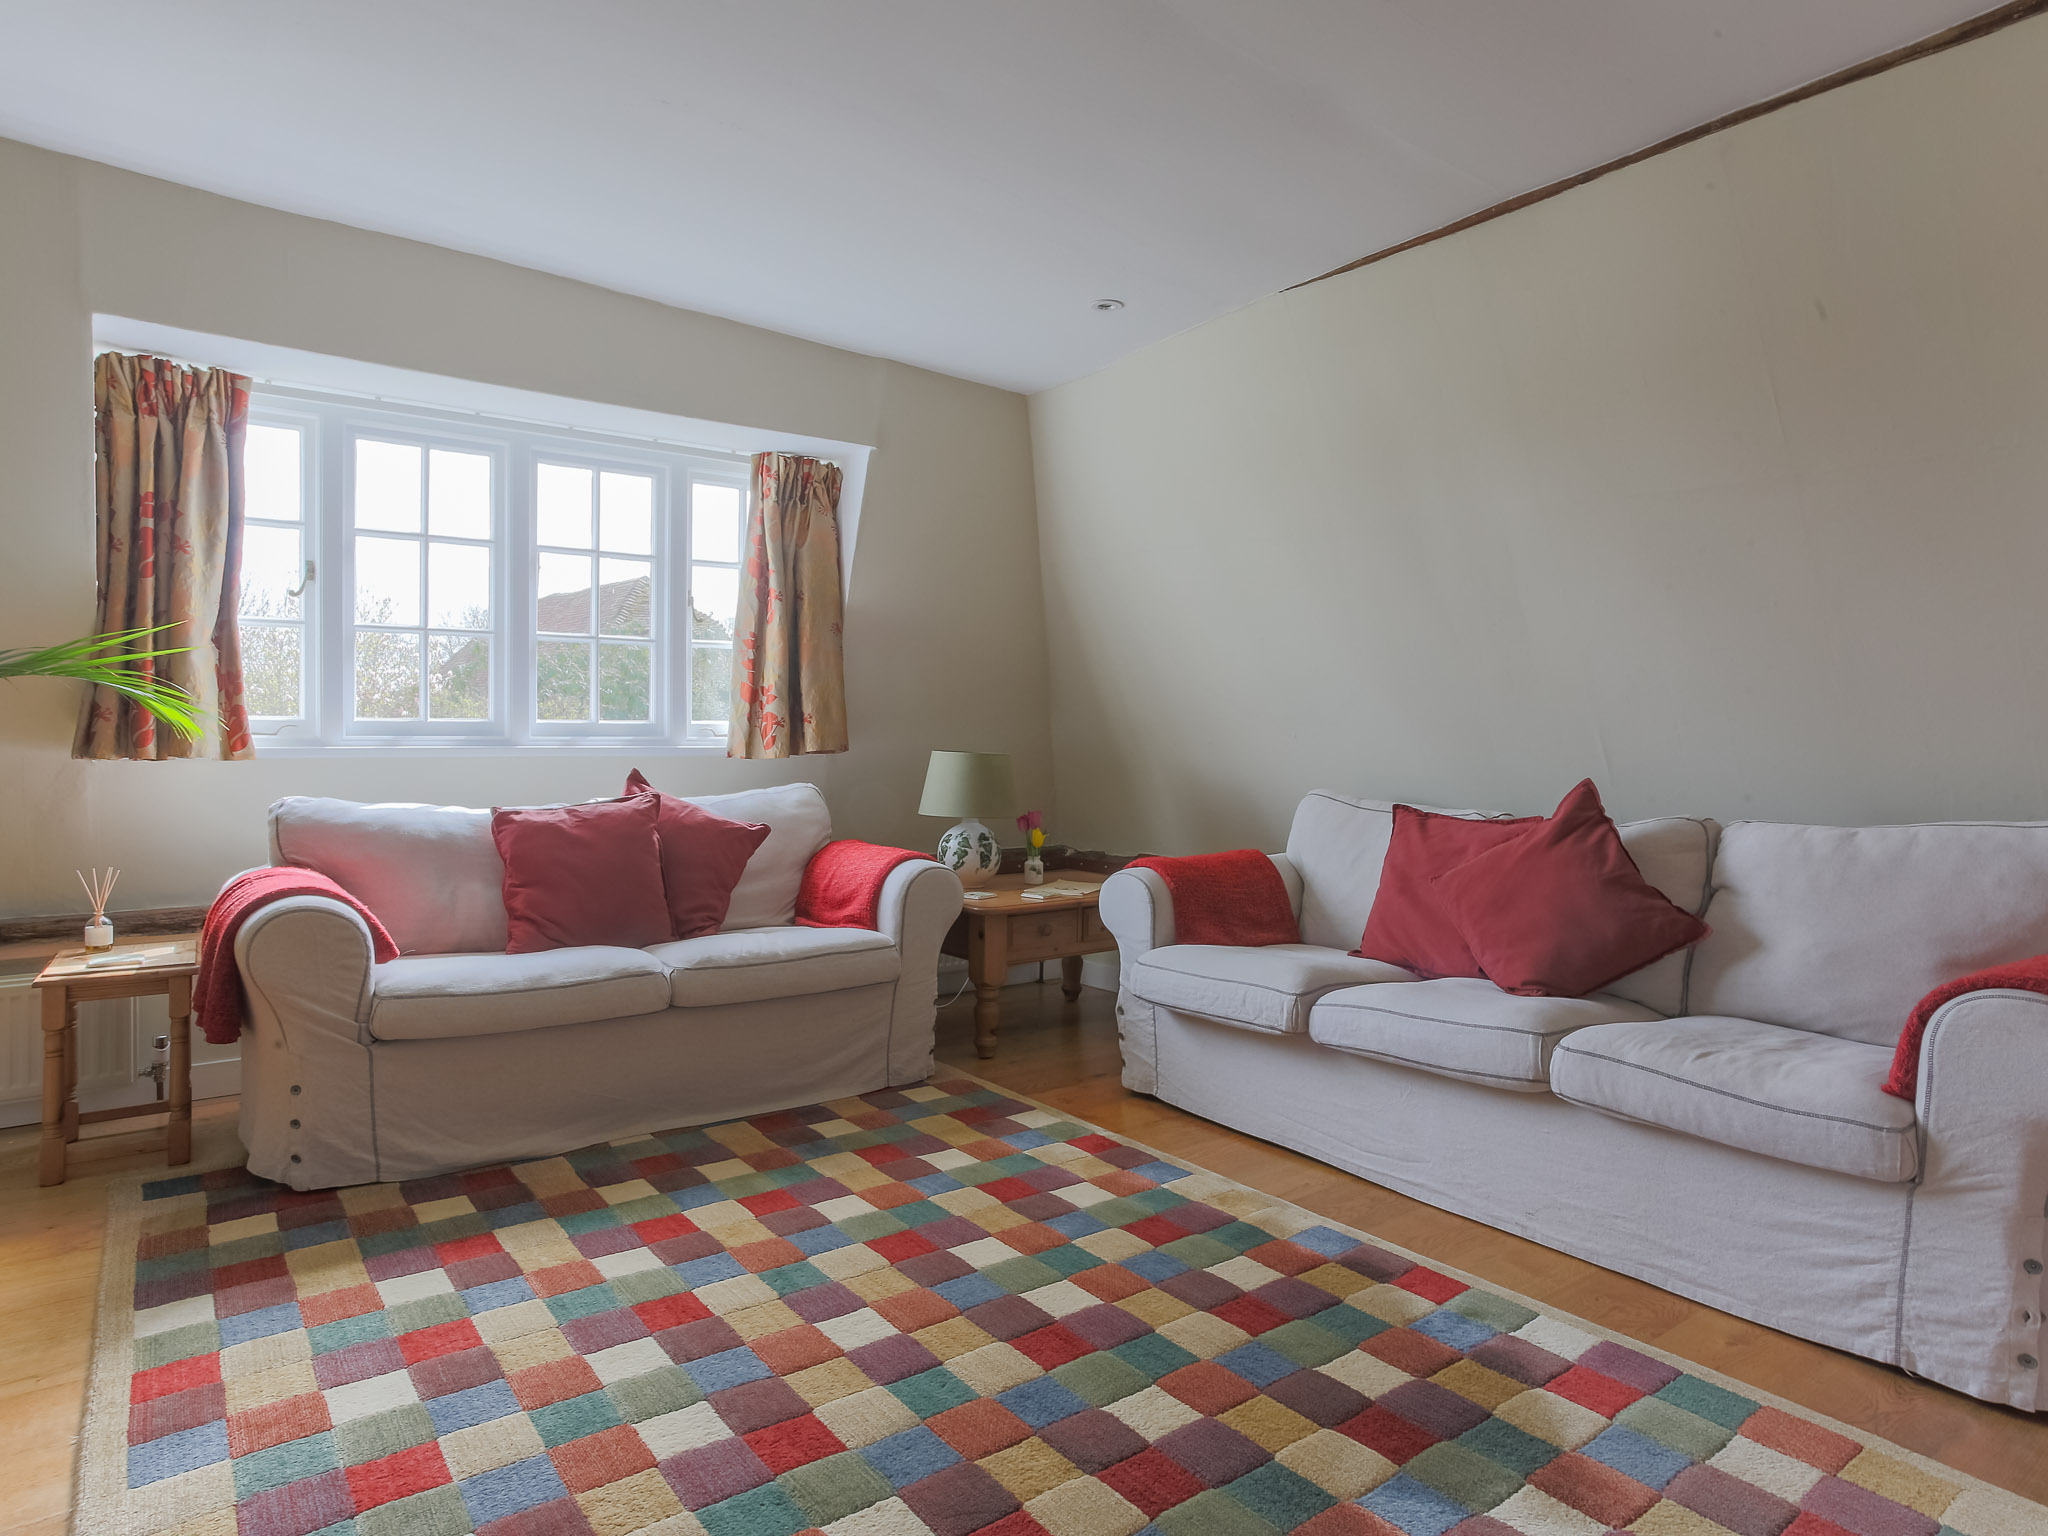 The sitting room is comfortably furnished and spacious